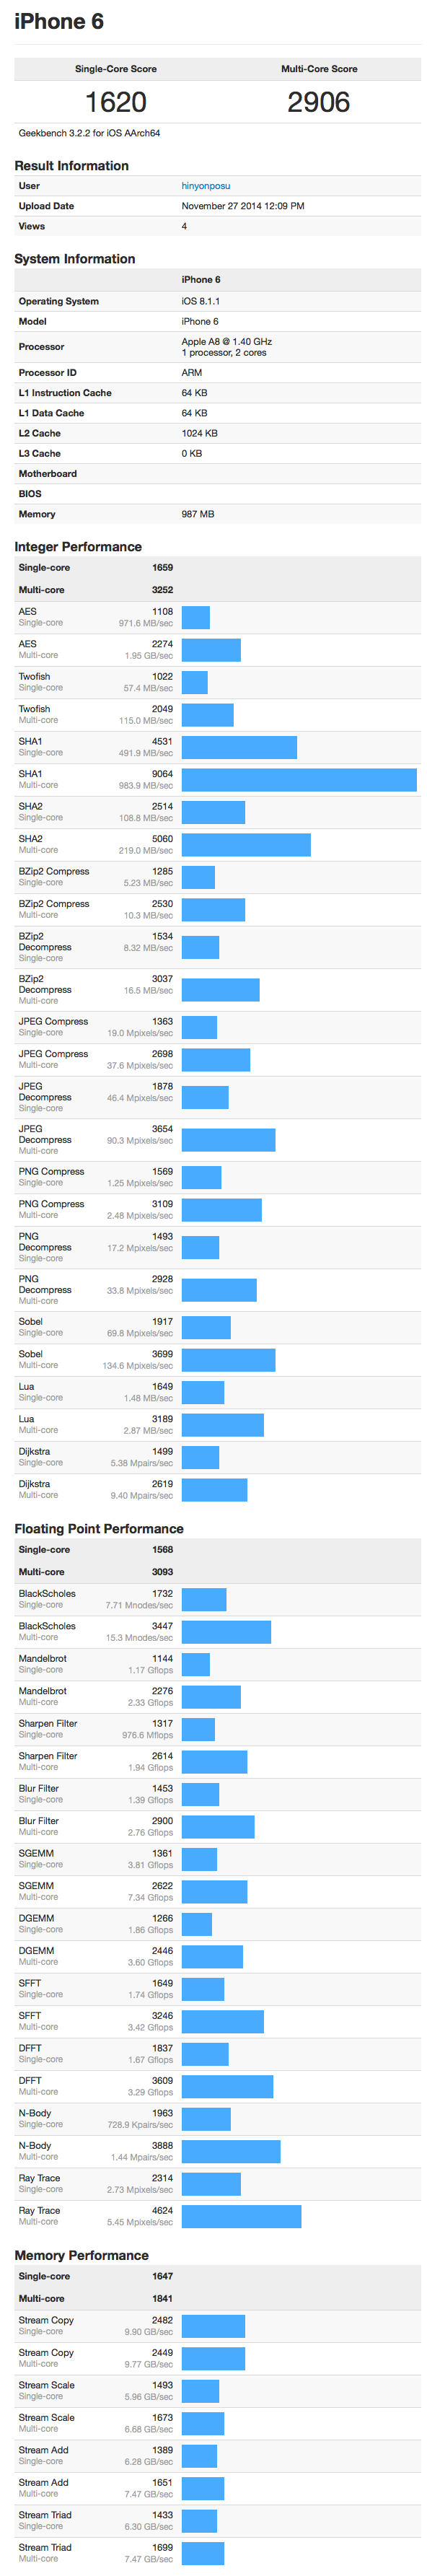 iPhone 6 - Geekbench Browser (20141127)